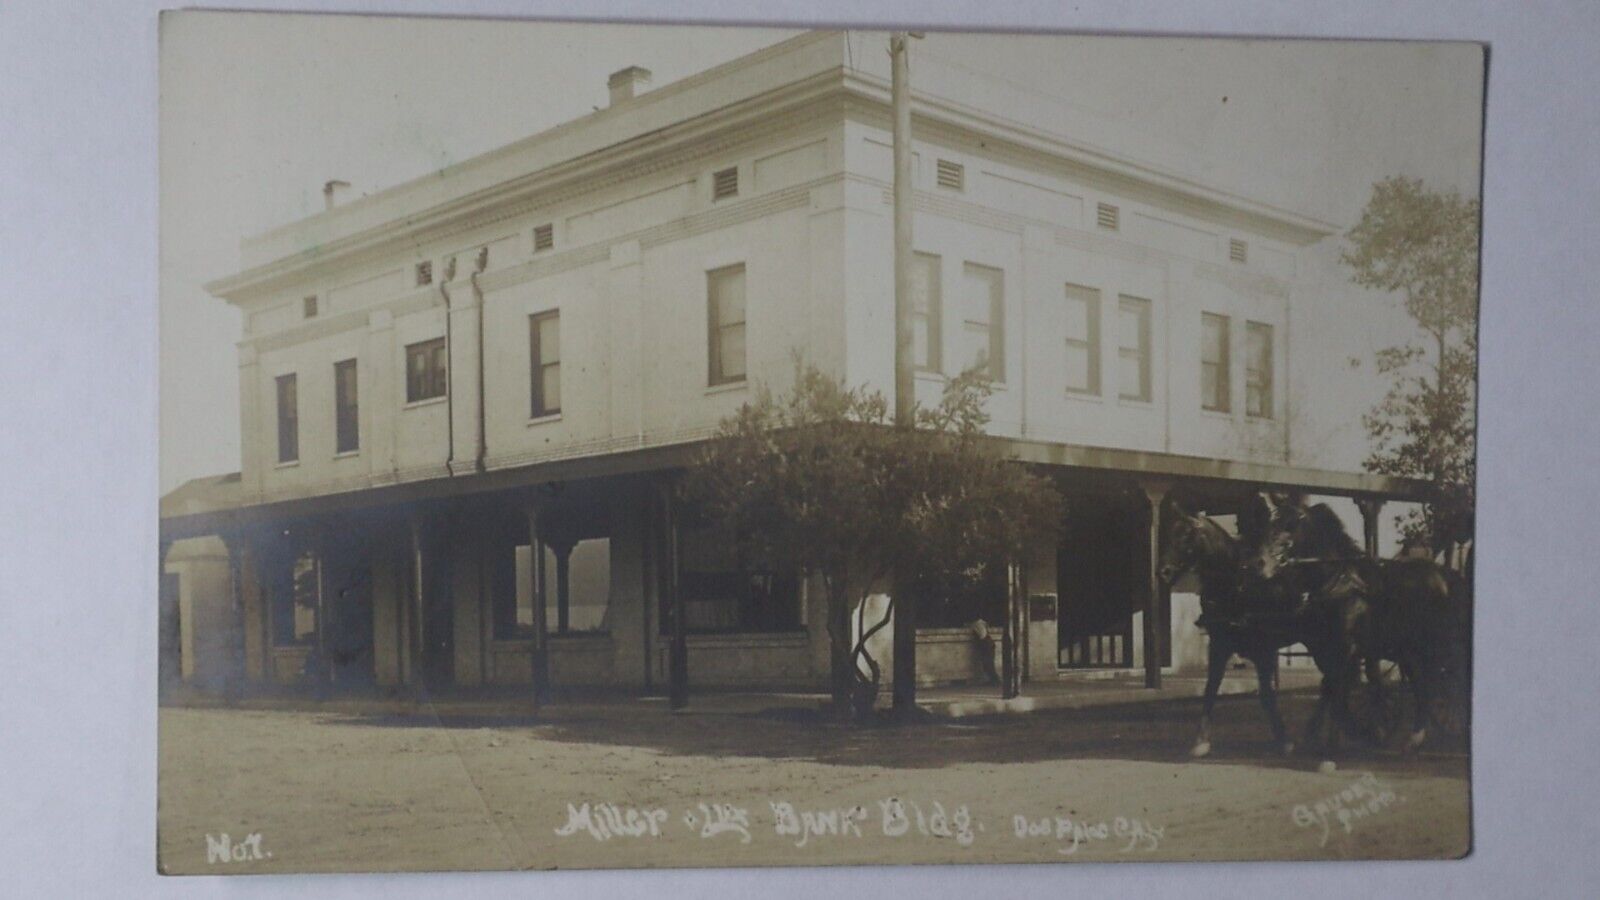 1912 South Dos Palos Merced CA Miller & Lux Bank Building Photo Post Card RPPC